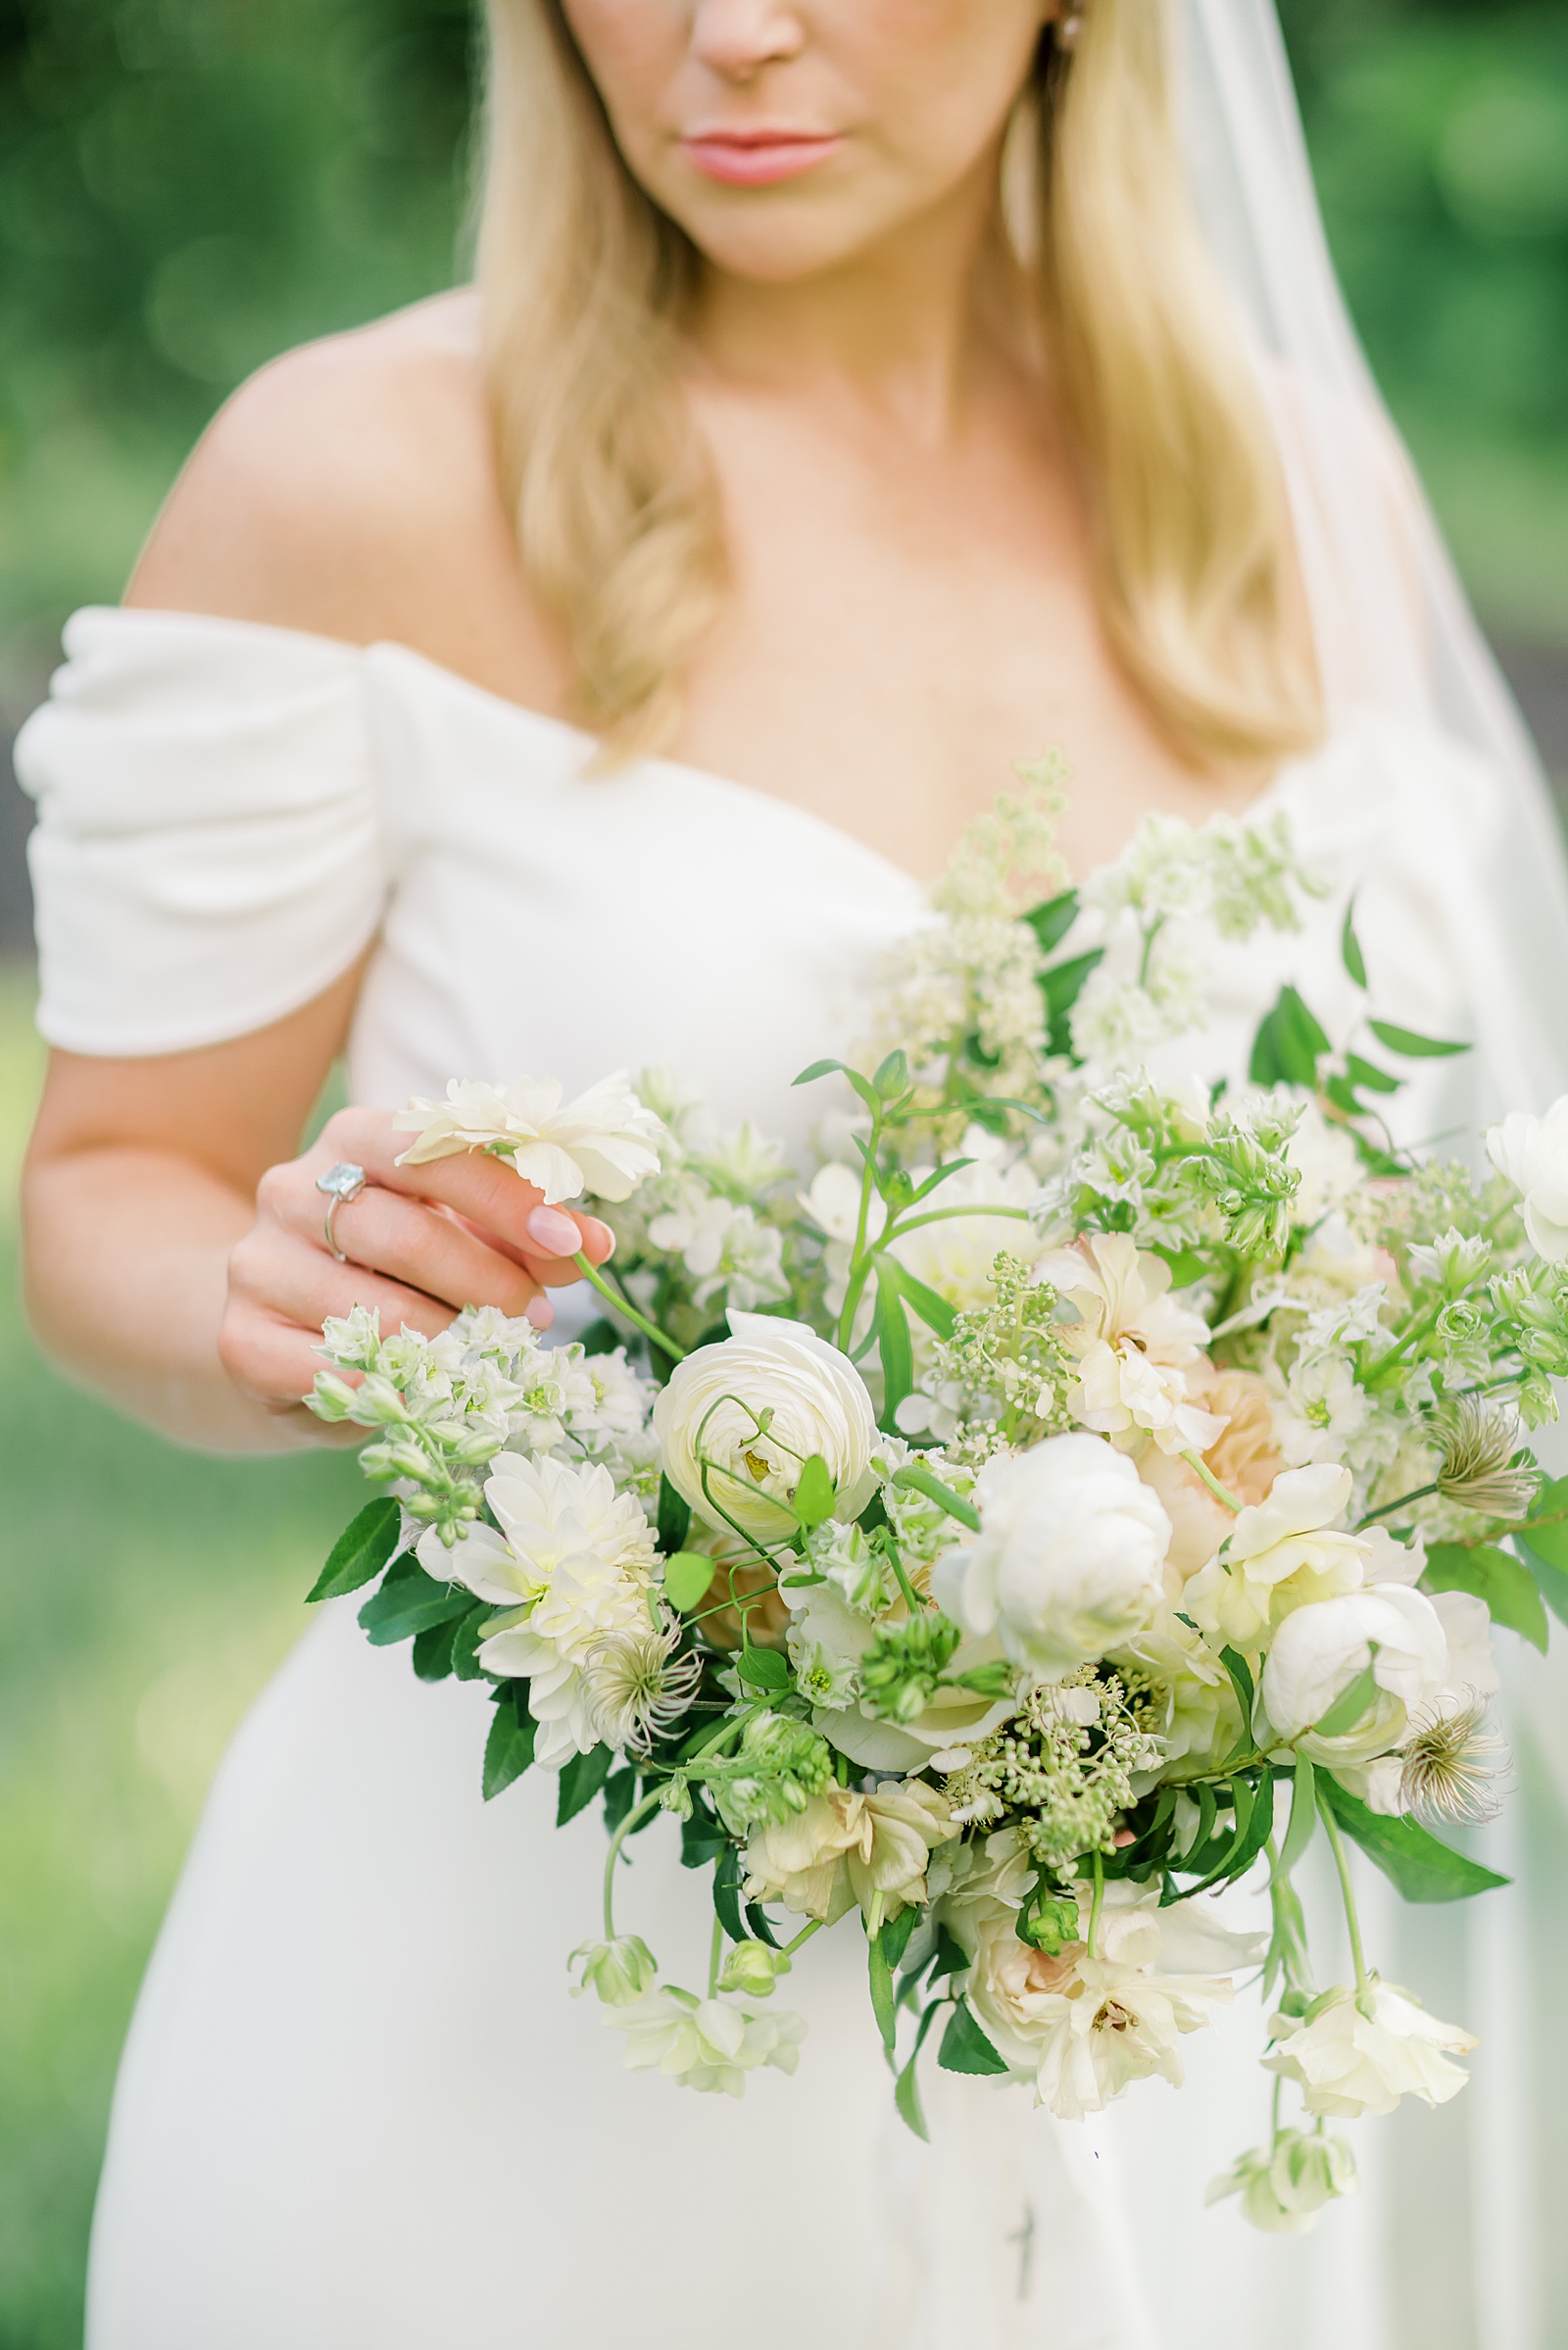 Bridal Bouquet with white flowers by The Budding Florist in Cincinnati